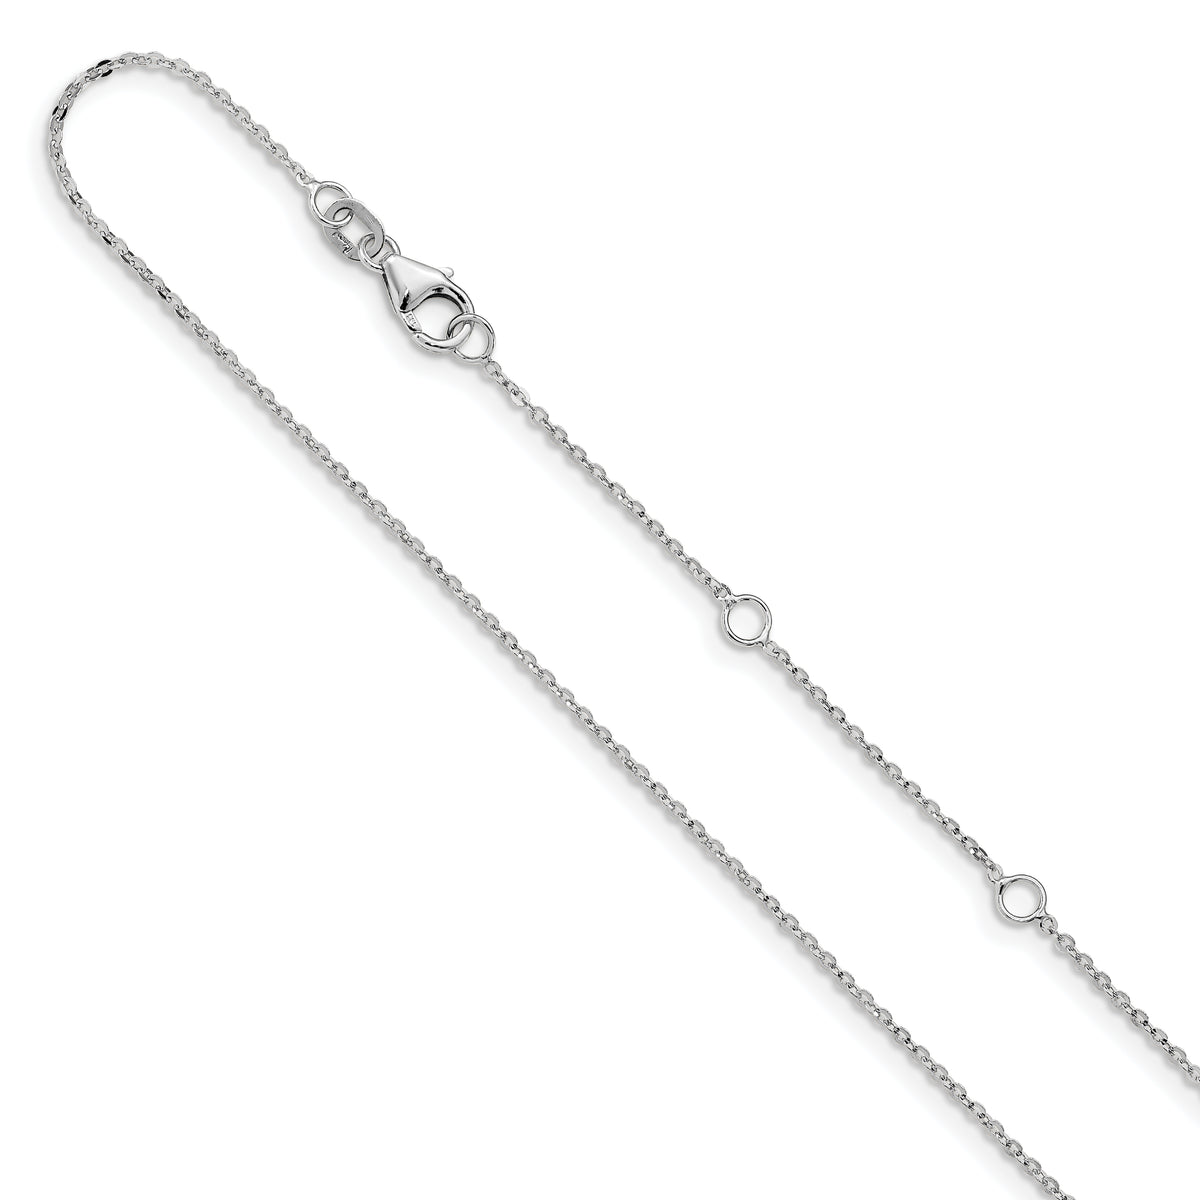 14k White Gold 1.2mm Flat Cable 1in+1in Adjustable Chain